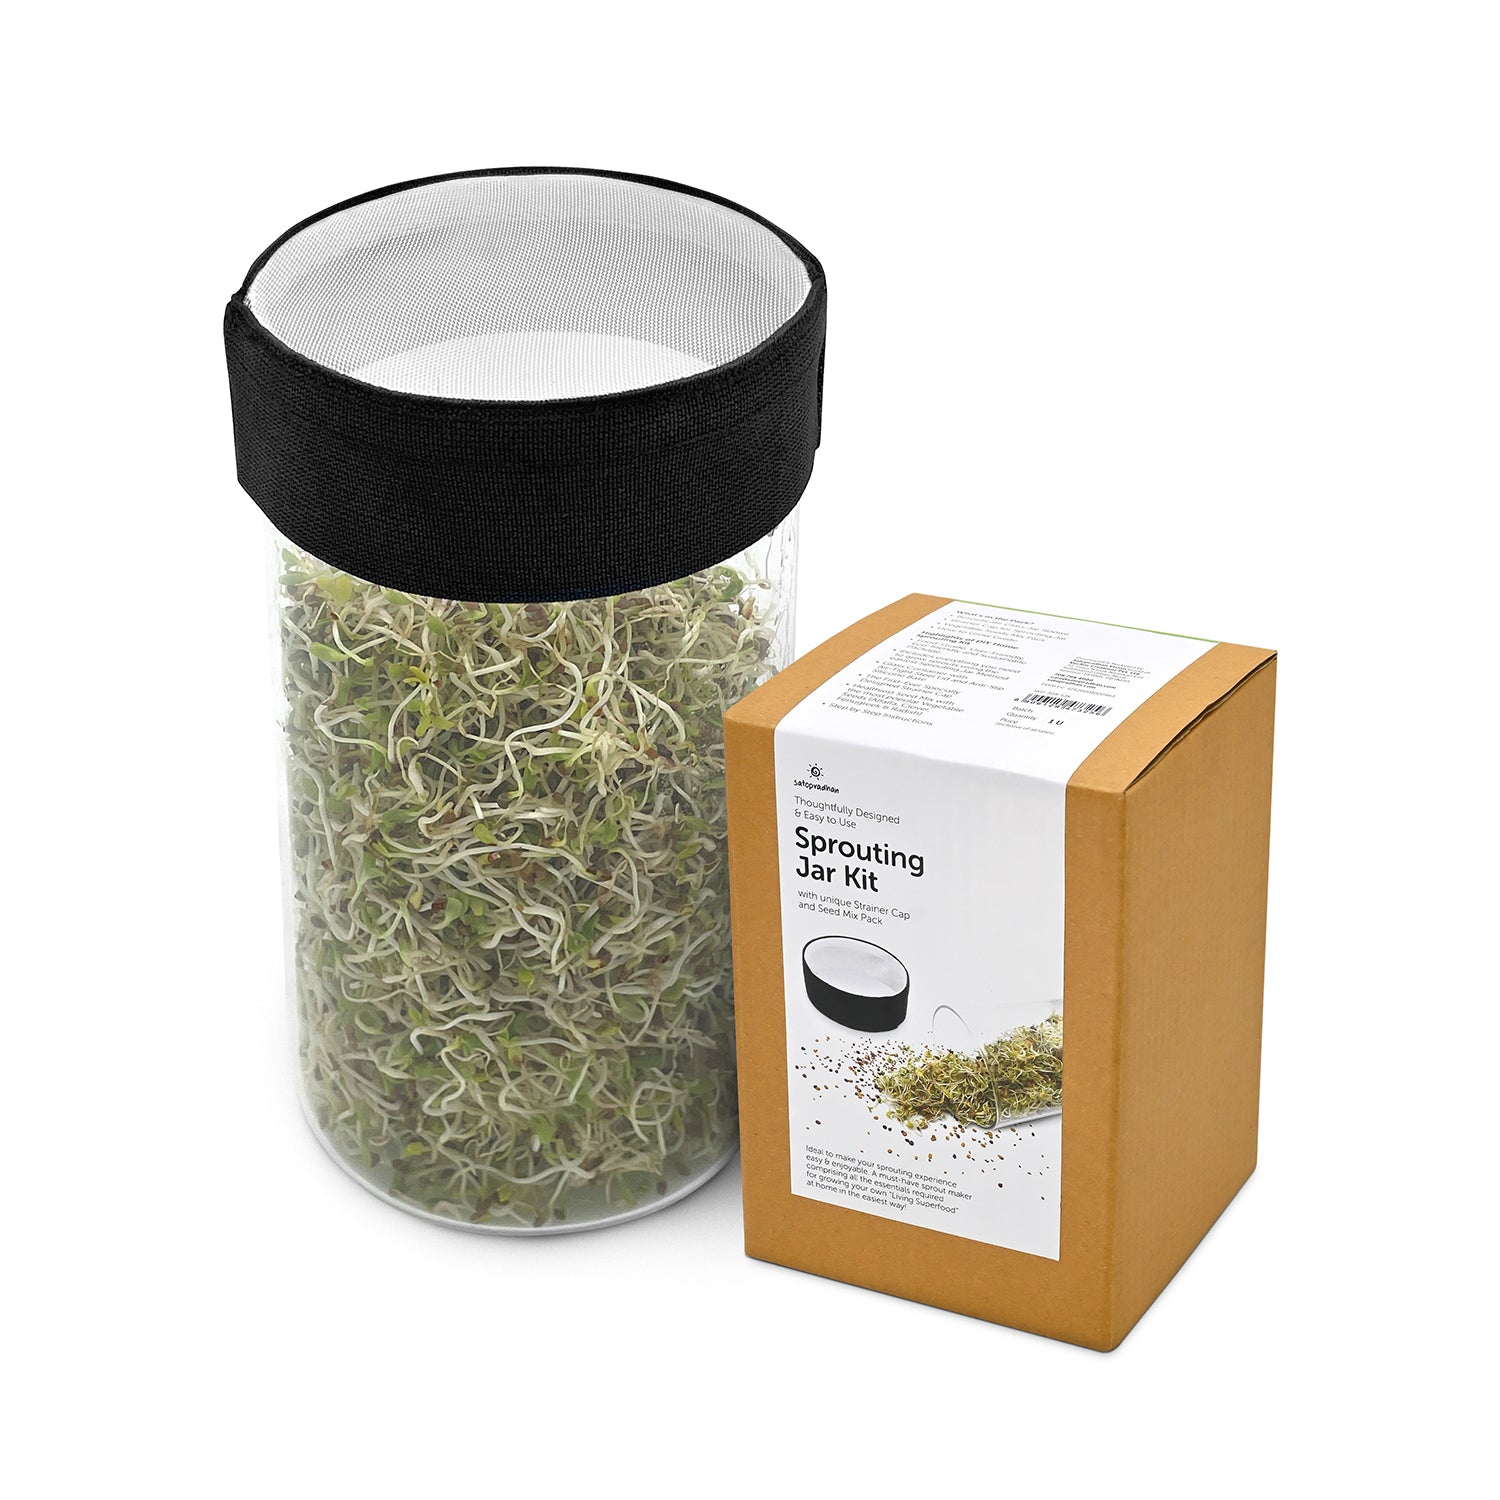 Sprouting Jar Kit -Unique Strainer Cap and Seed Mix Pack - Thoughtfully Designed & Easy to Use DIY Growing Kit